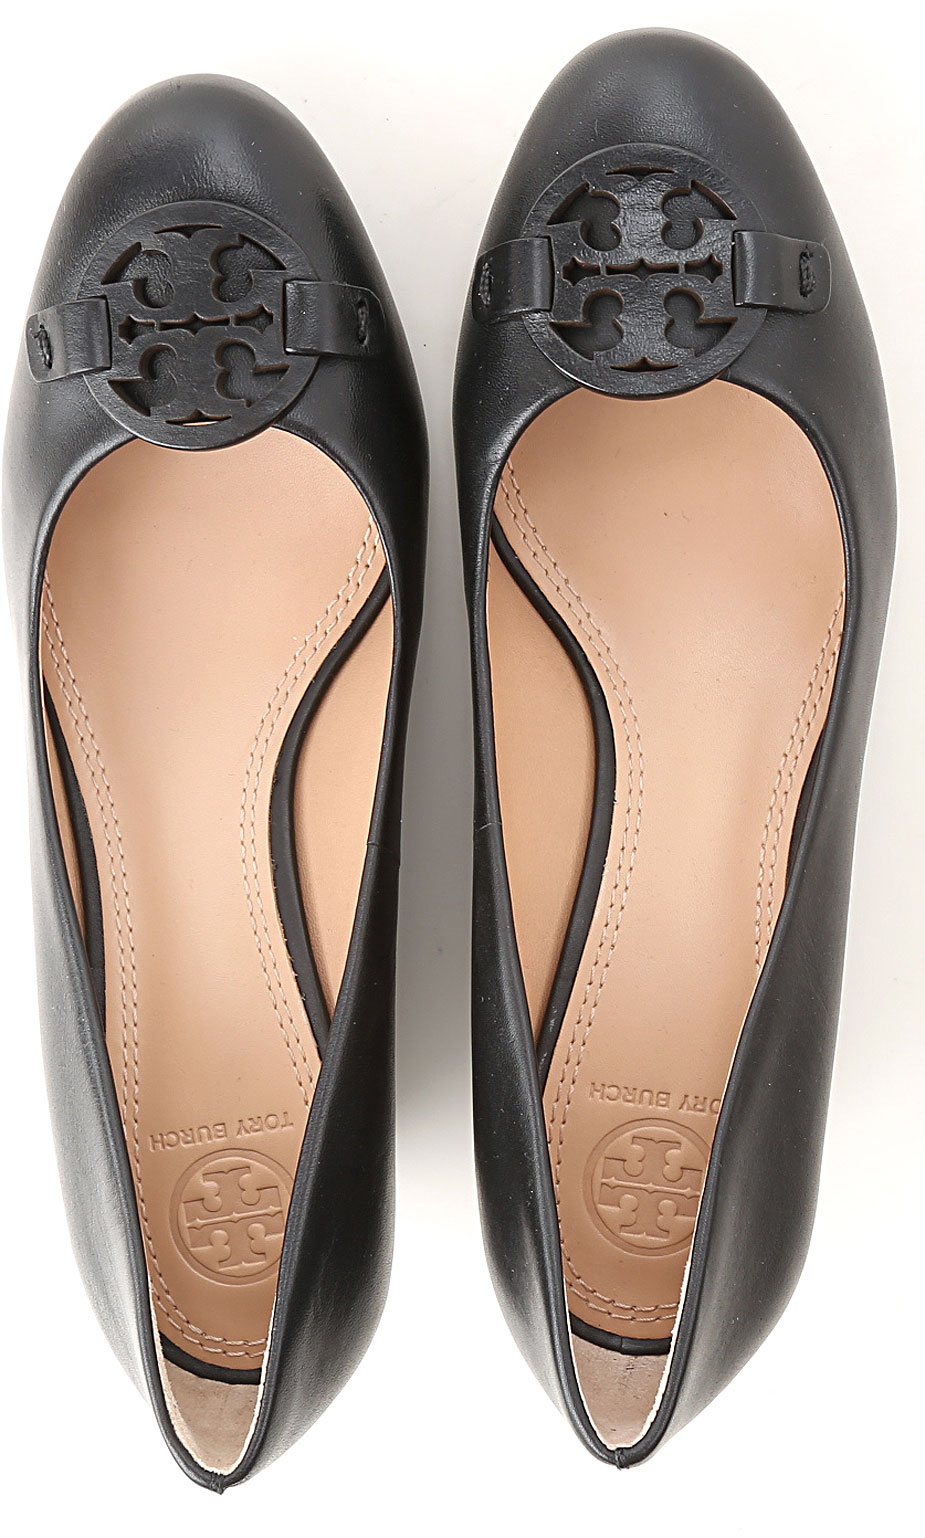 Womens Shoes Tory Burch, Style code: 40296-001-